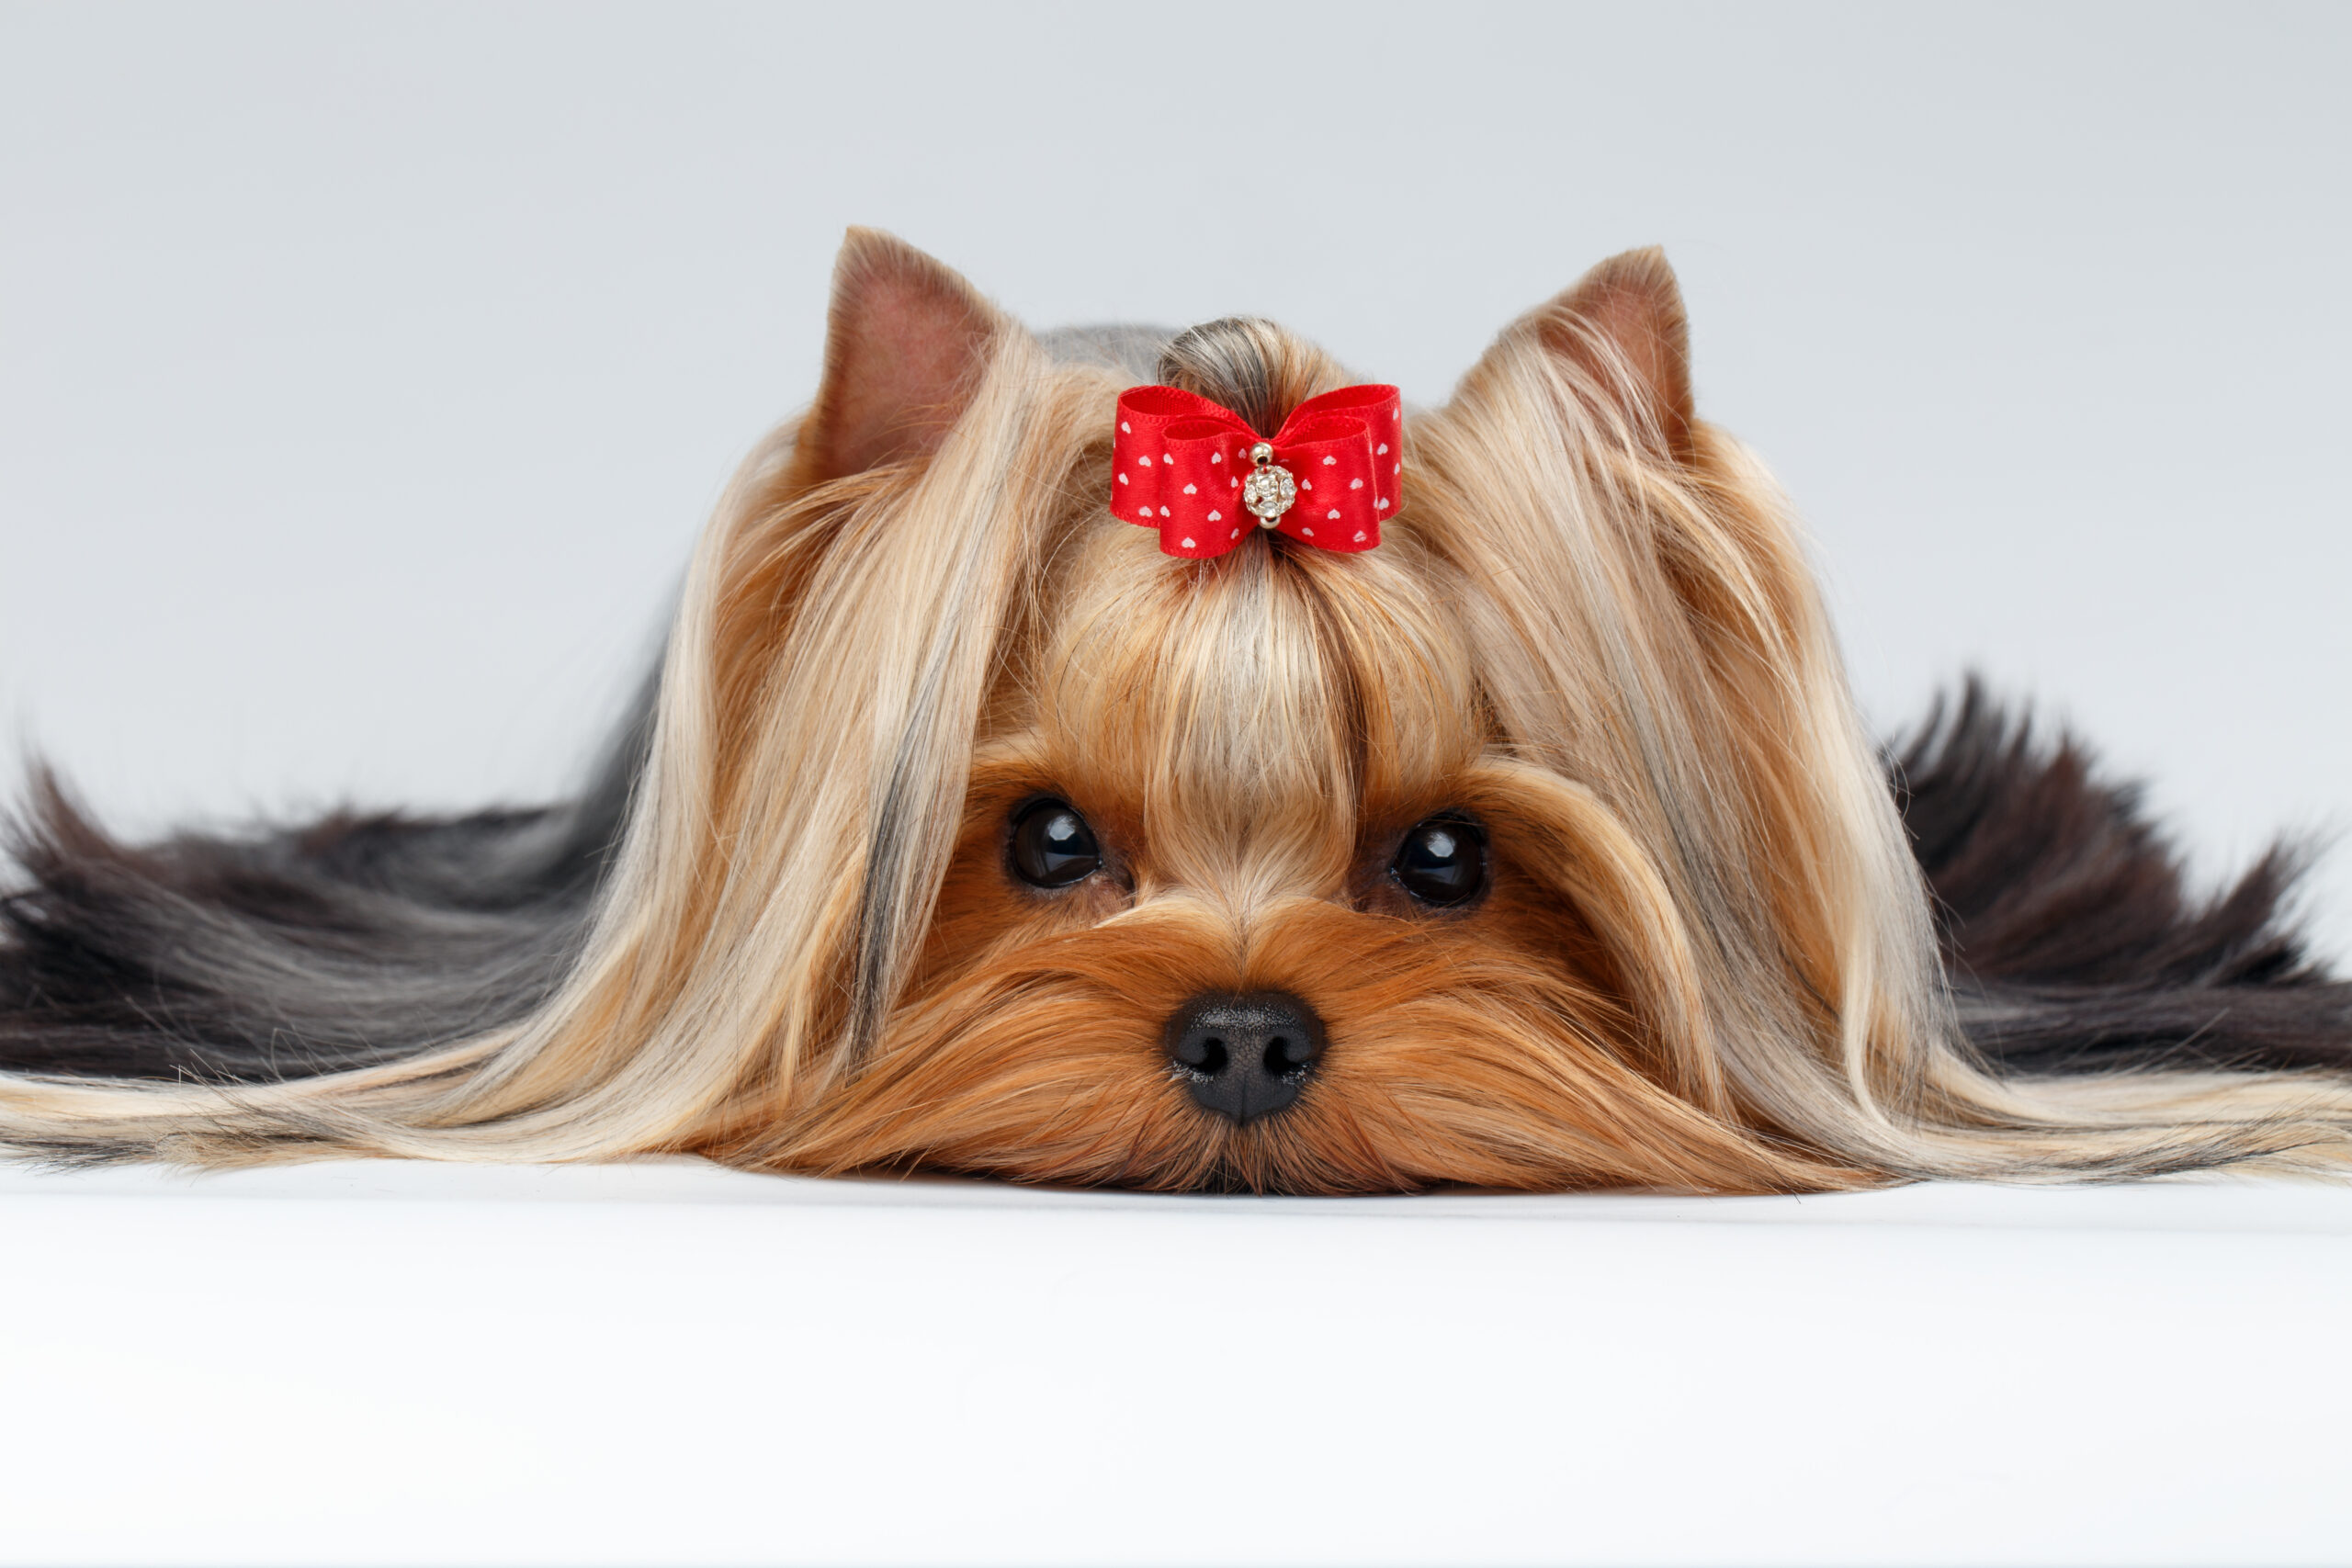 Closeup Portrait of Yorkshire Terrier Dog Lying on White background